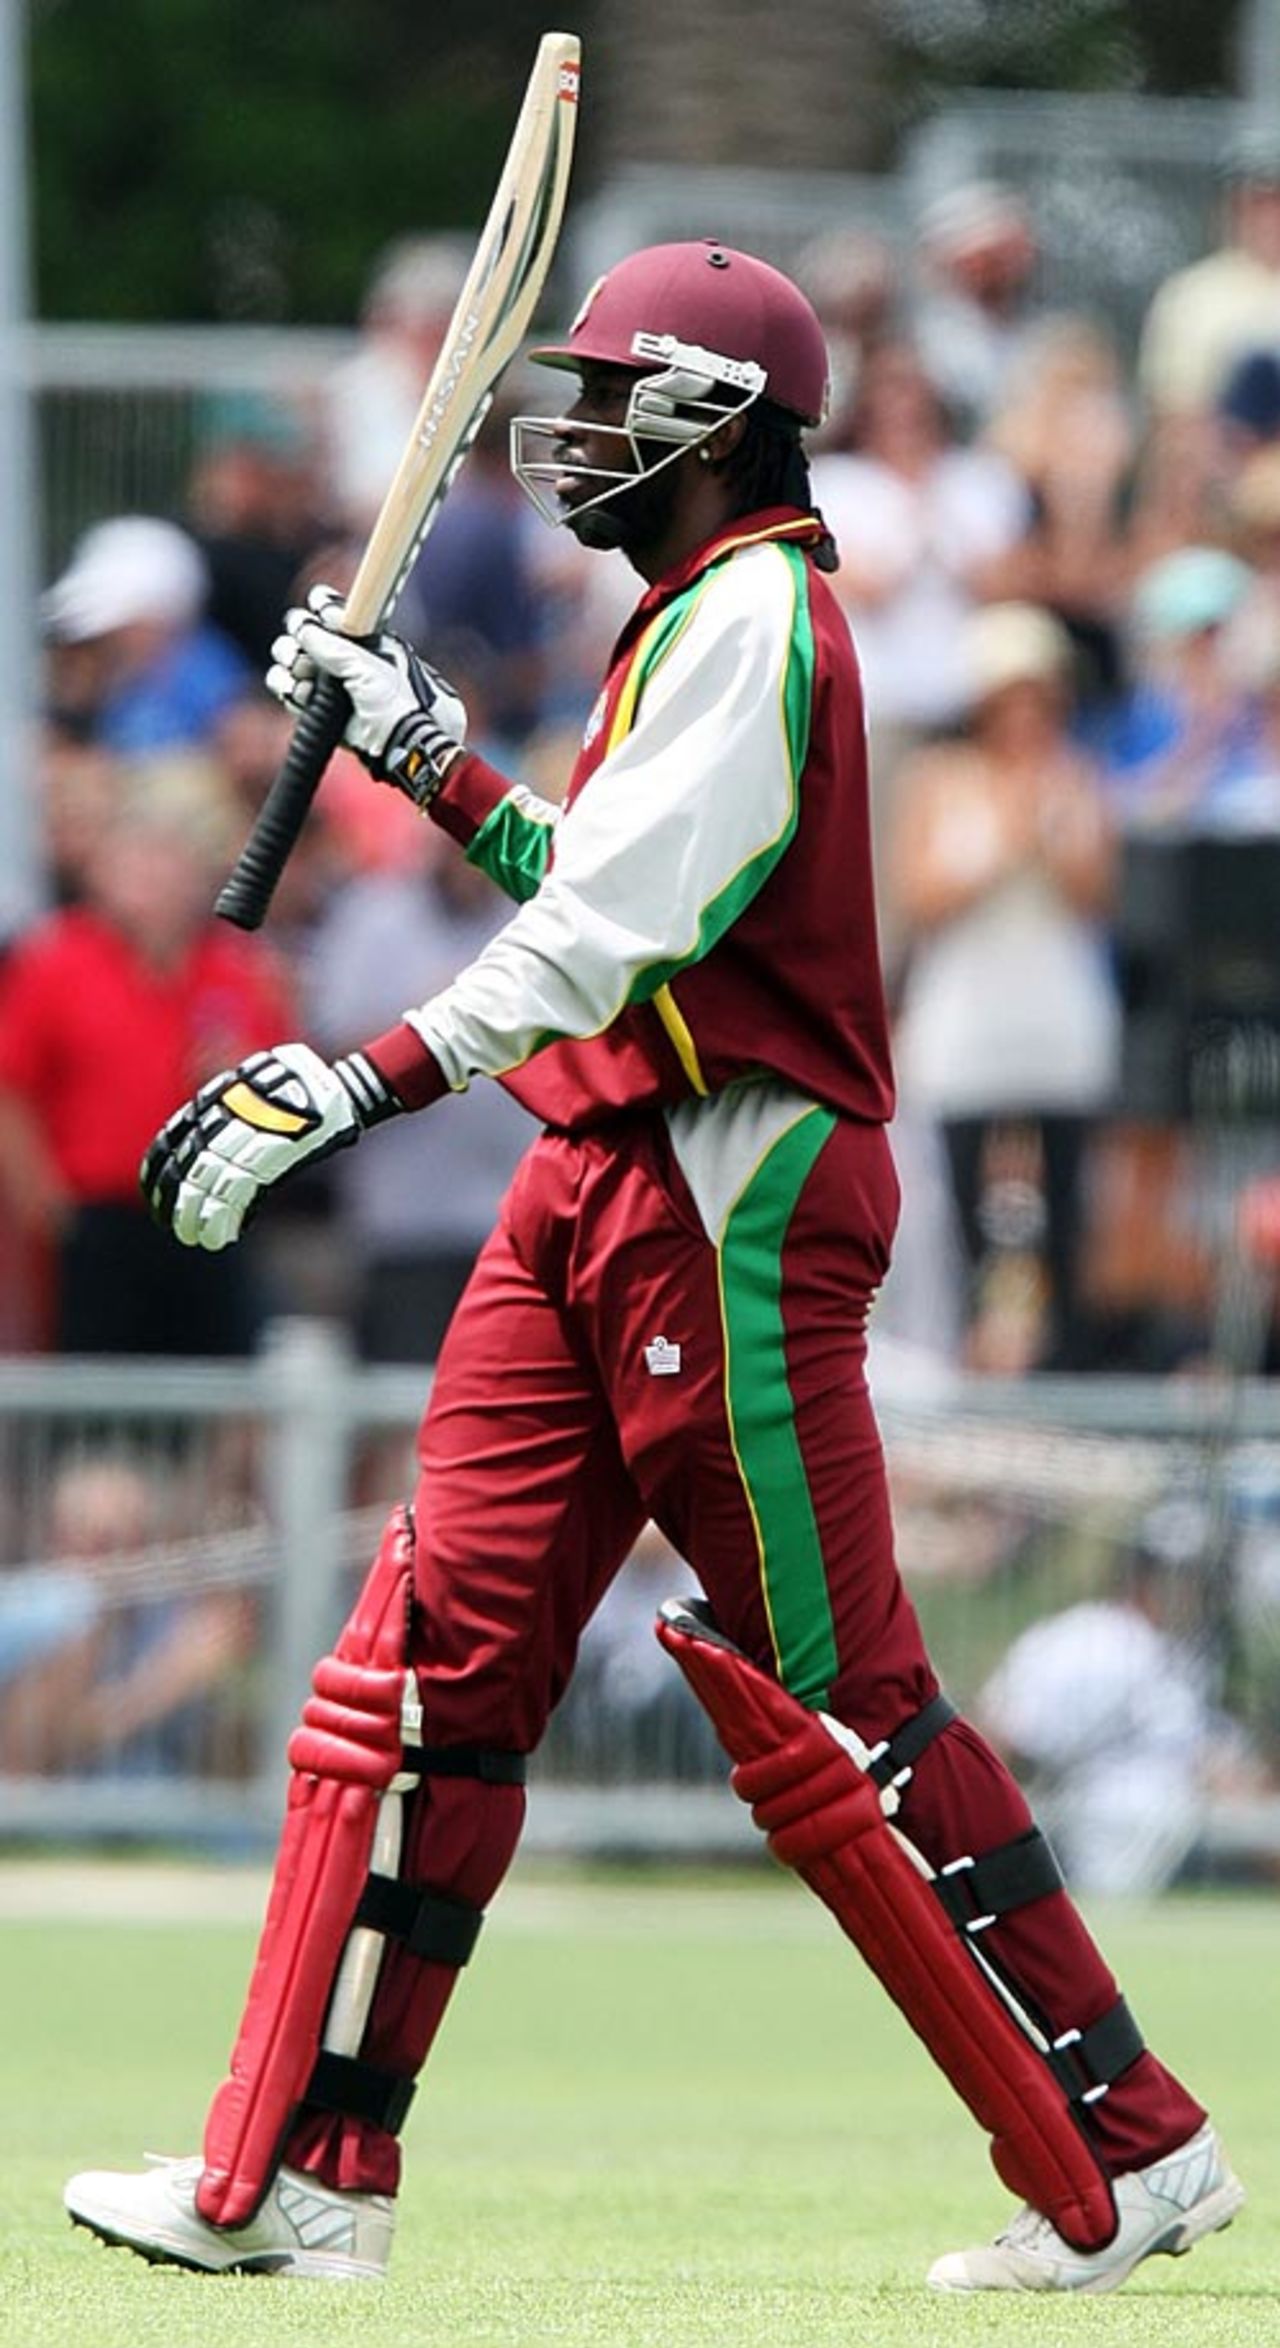 Chris Gayle brings up his fifty, New Zealand v West Indies, 5th ODI, Napier, January 13, 2009